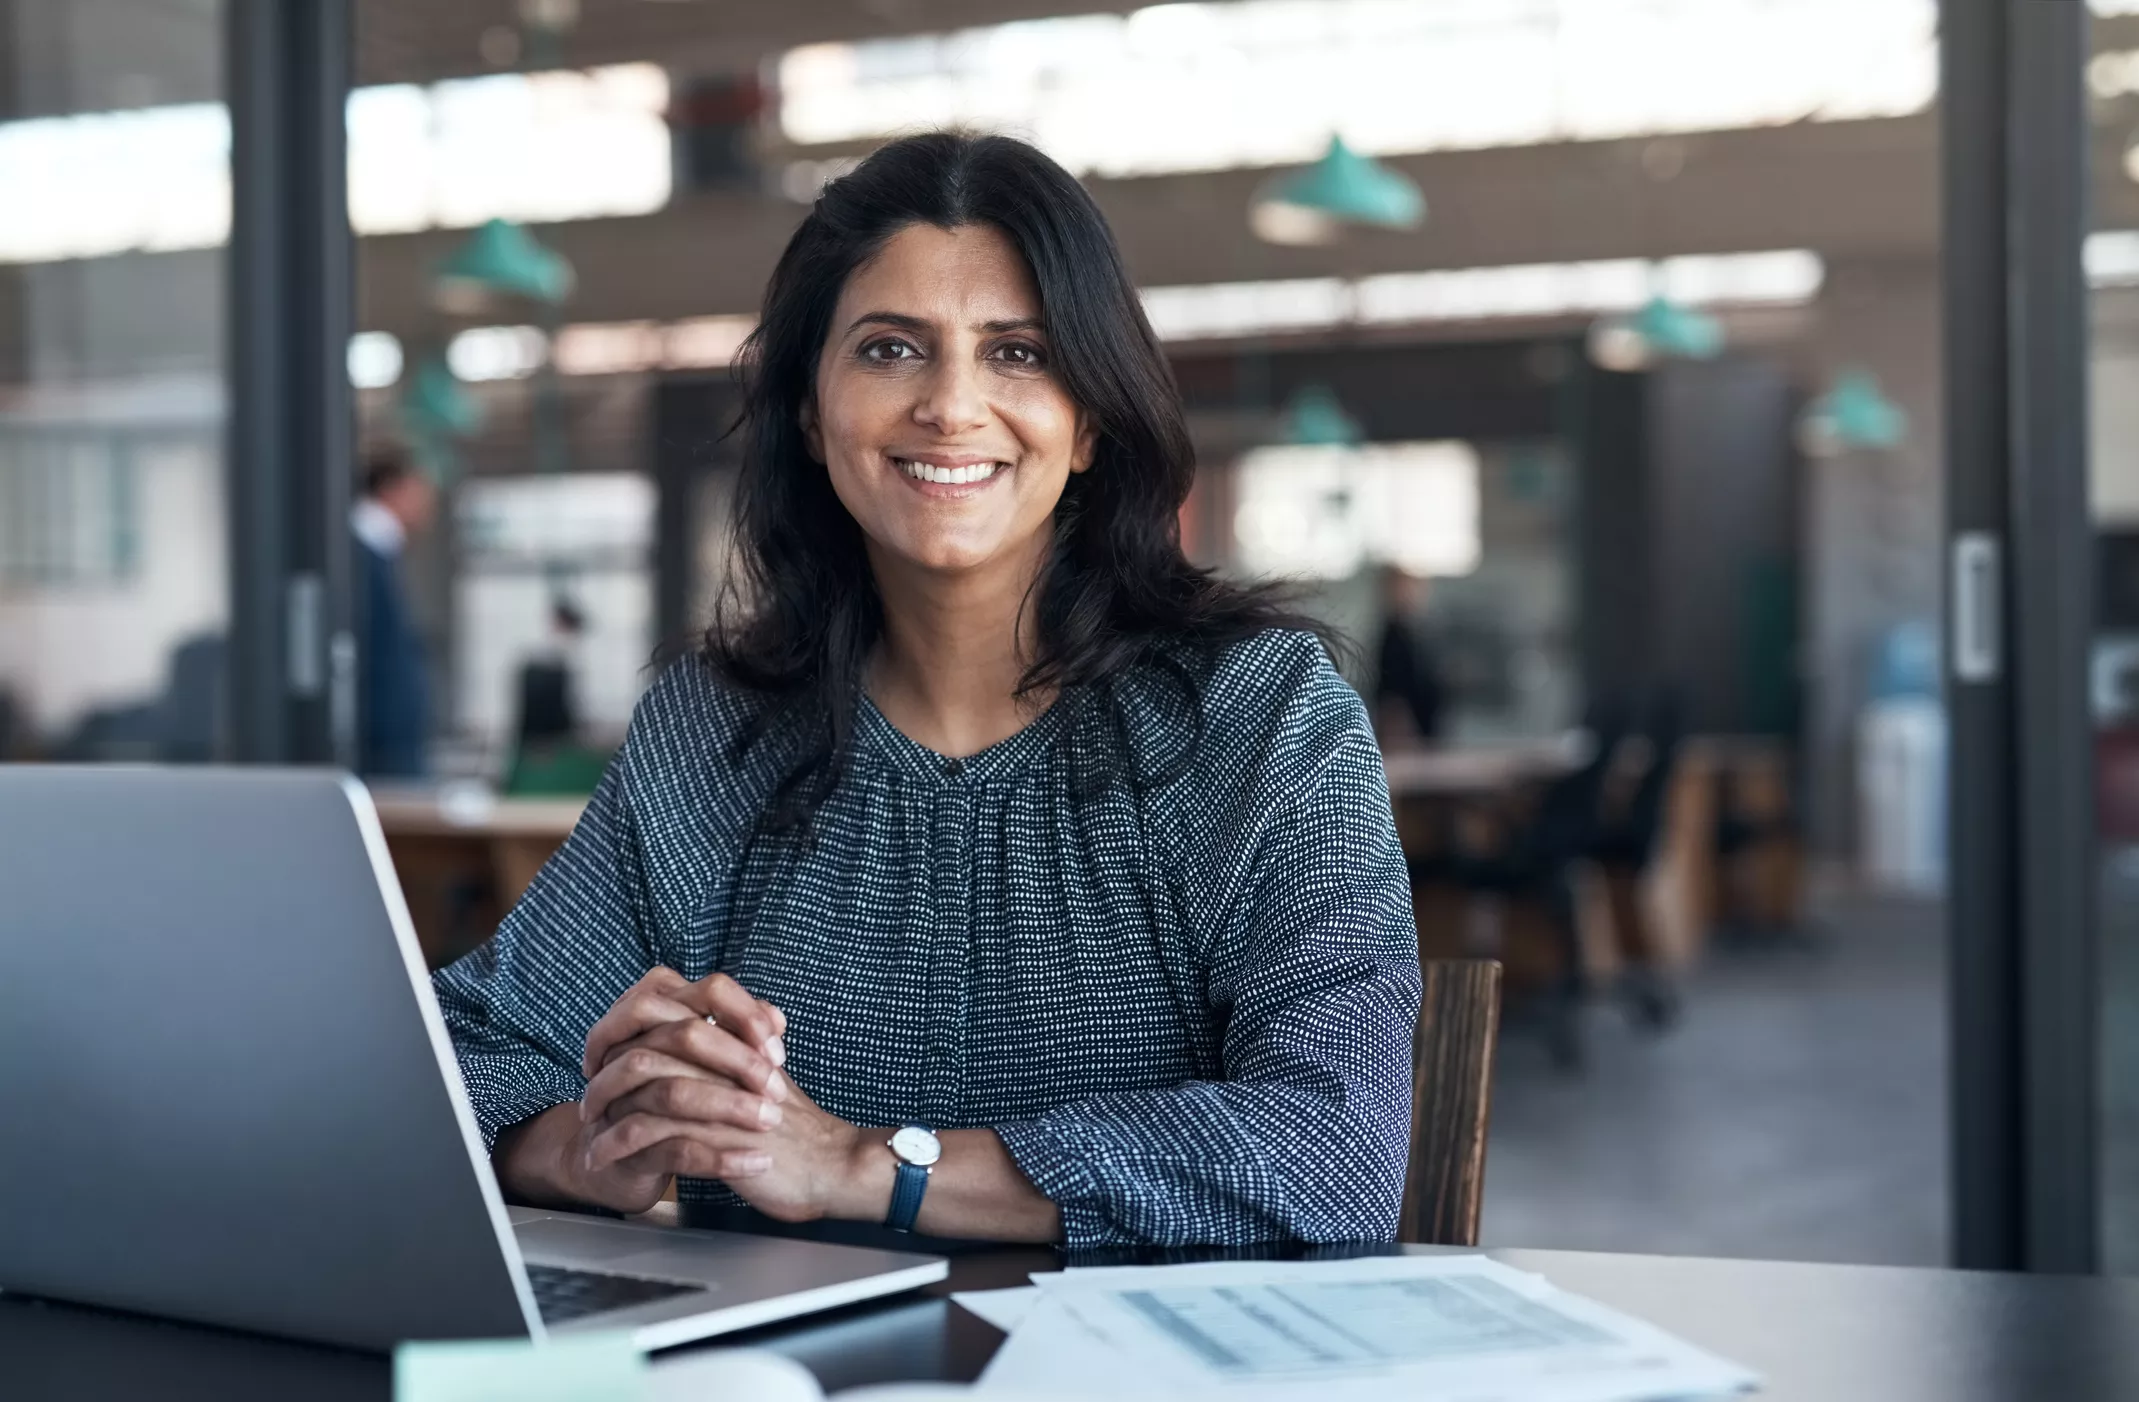 Midland Financial Advisor smiling at camera while sitting in front of computer